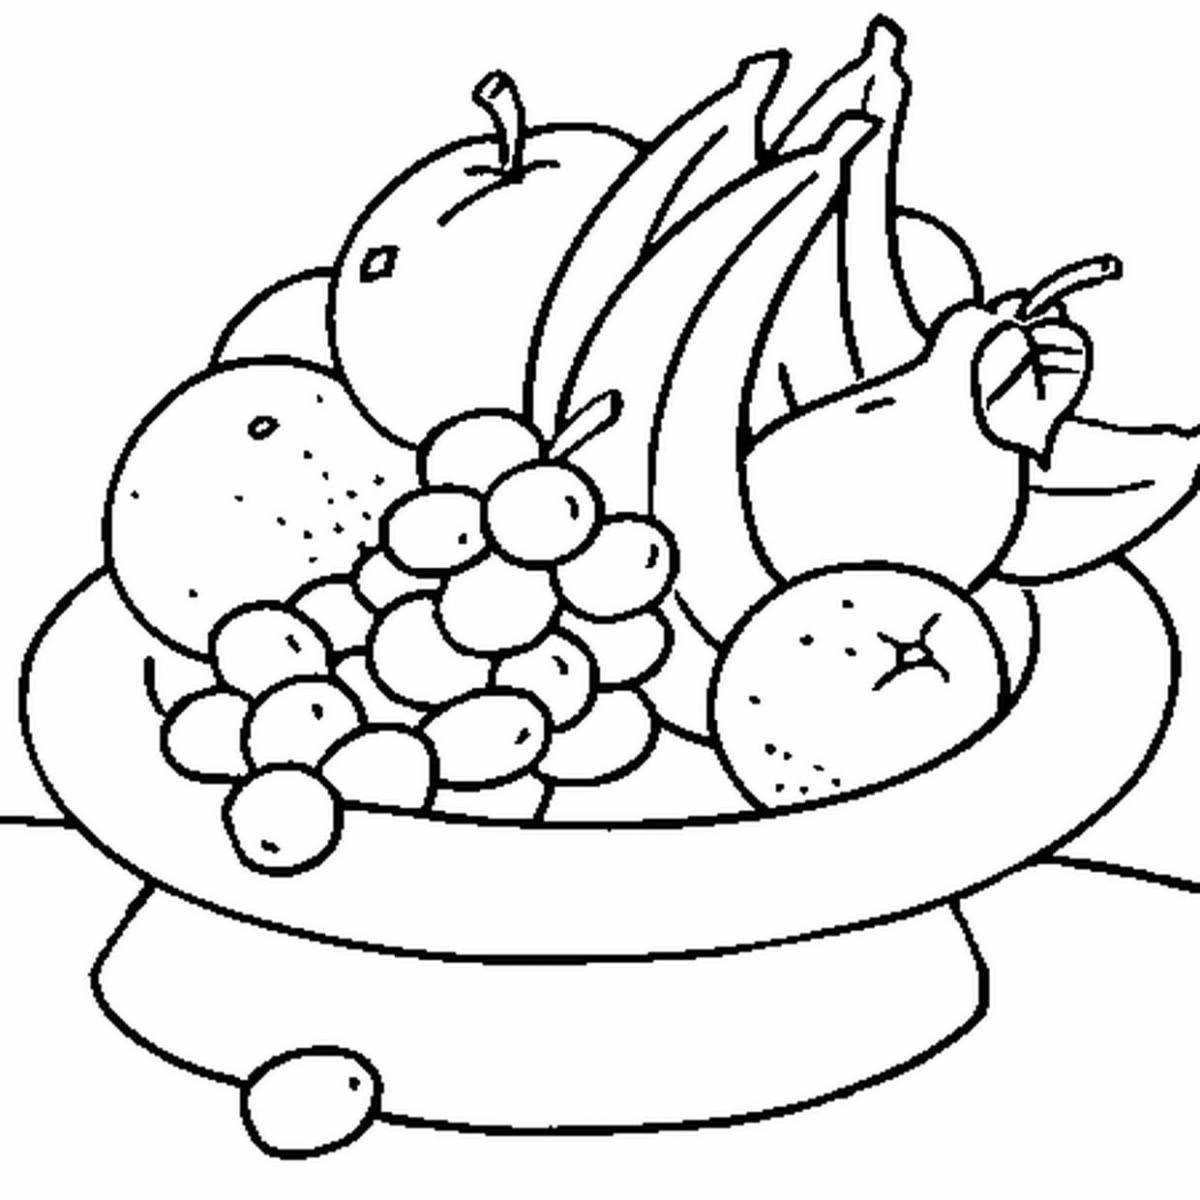 Attractive fruit plate coloring book for kids